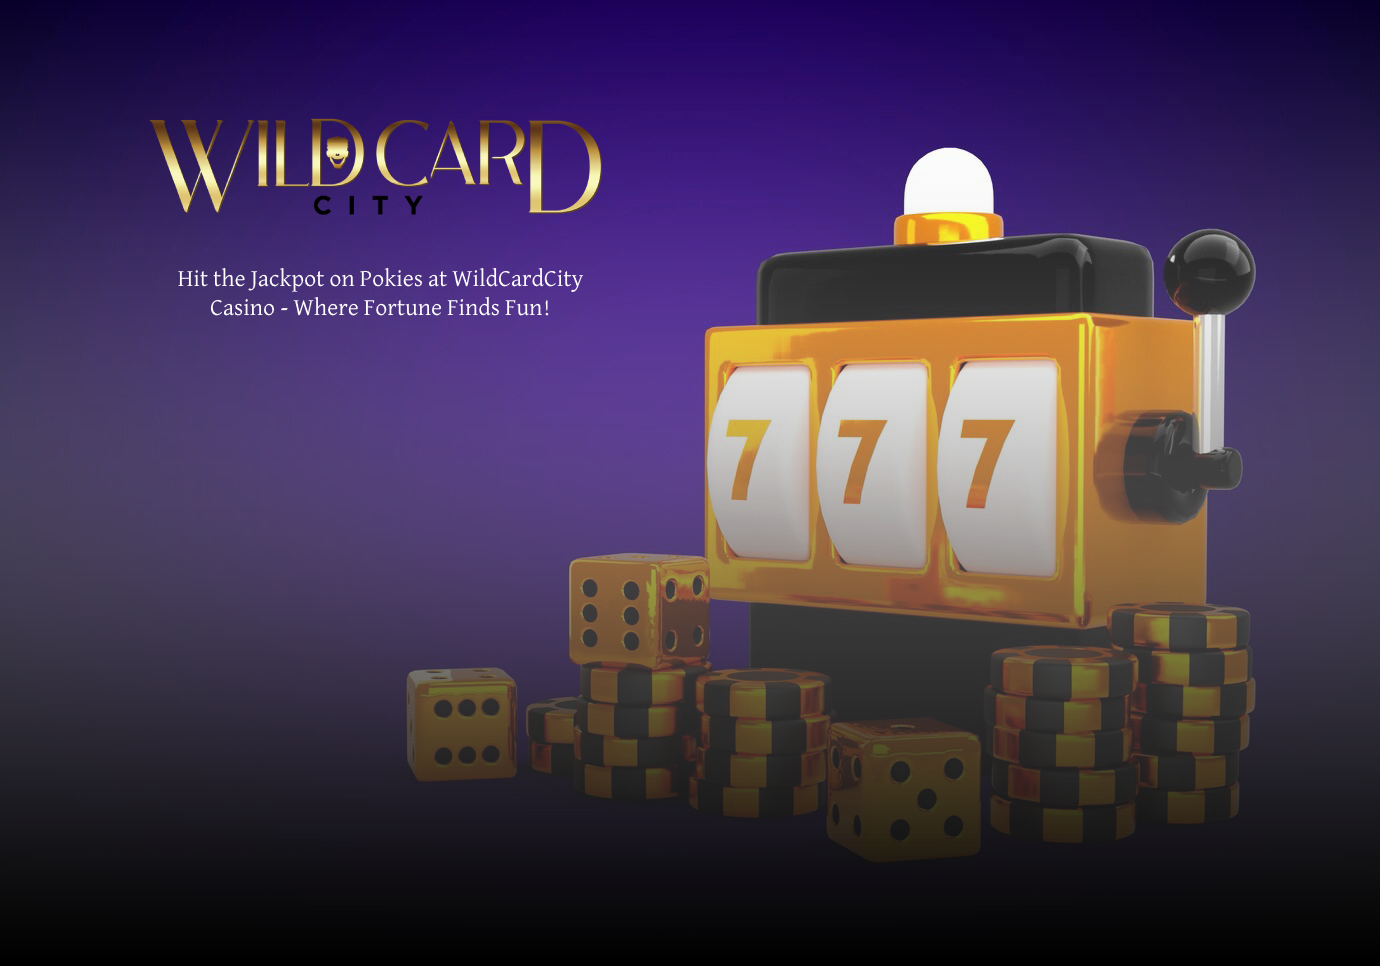 Hit the Jackpot on Pokies at WildCardCity Casino - Where Fortune Finds Fun!